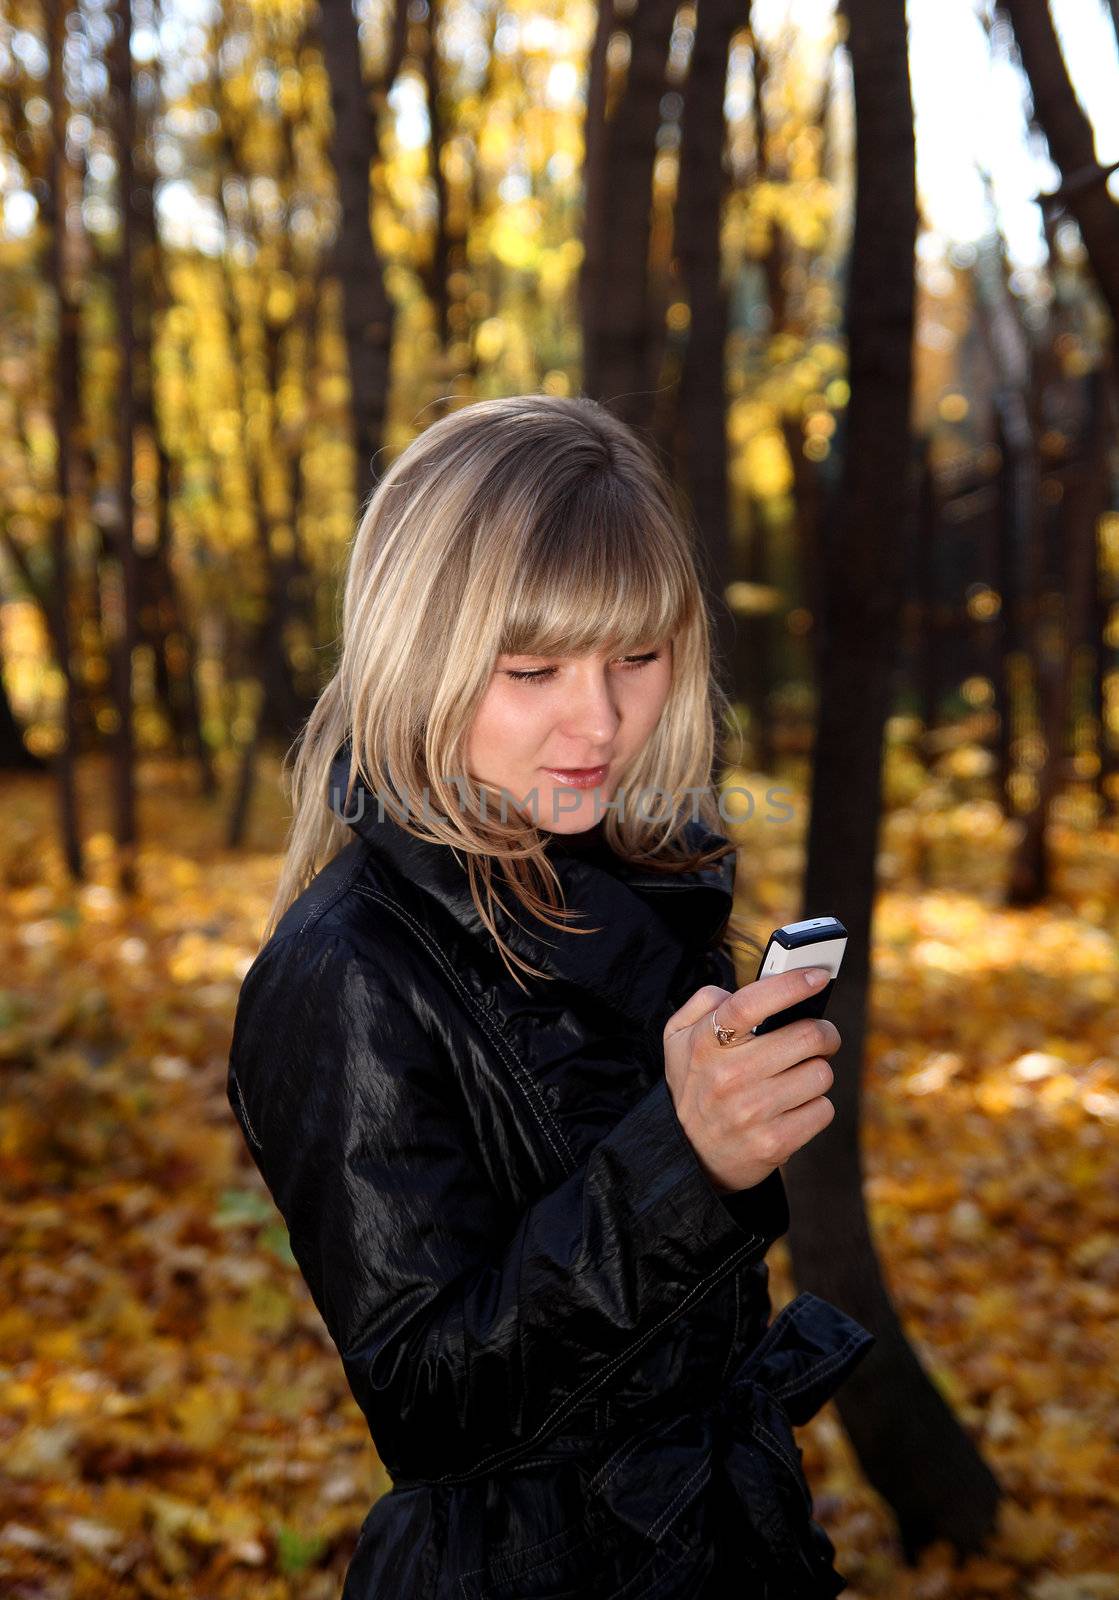 girl messaging with phone by Mikko